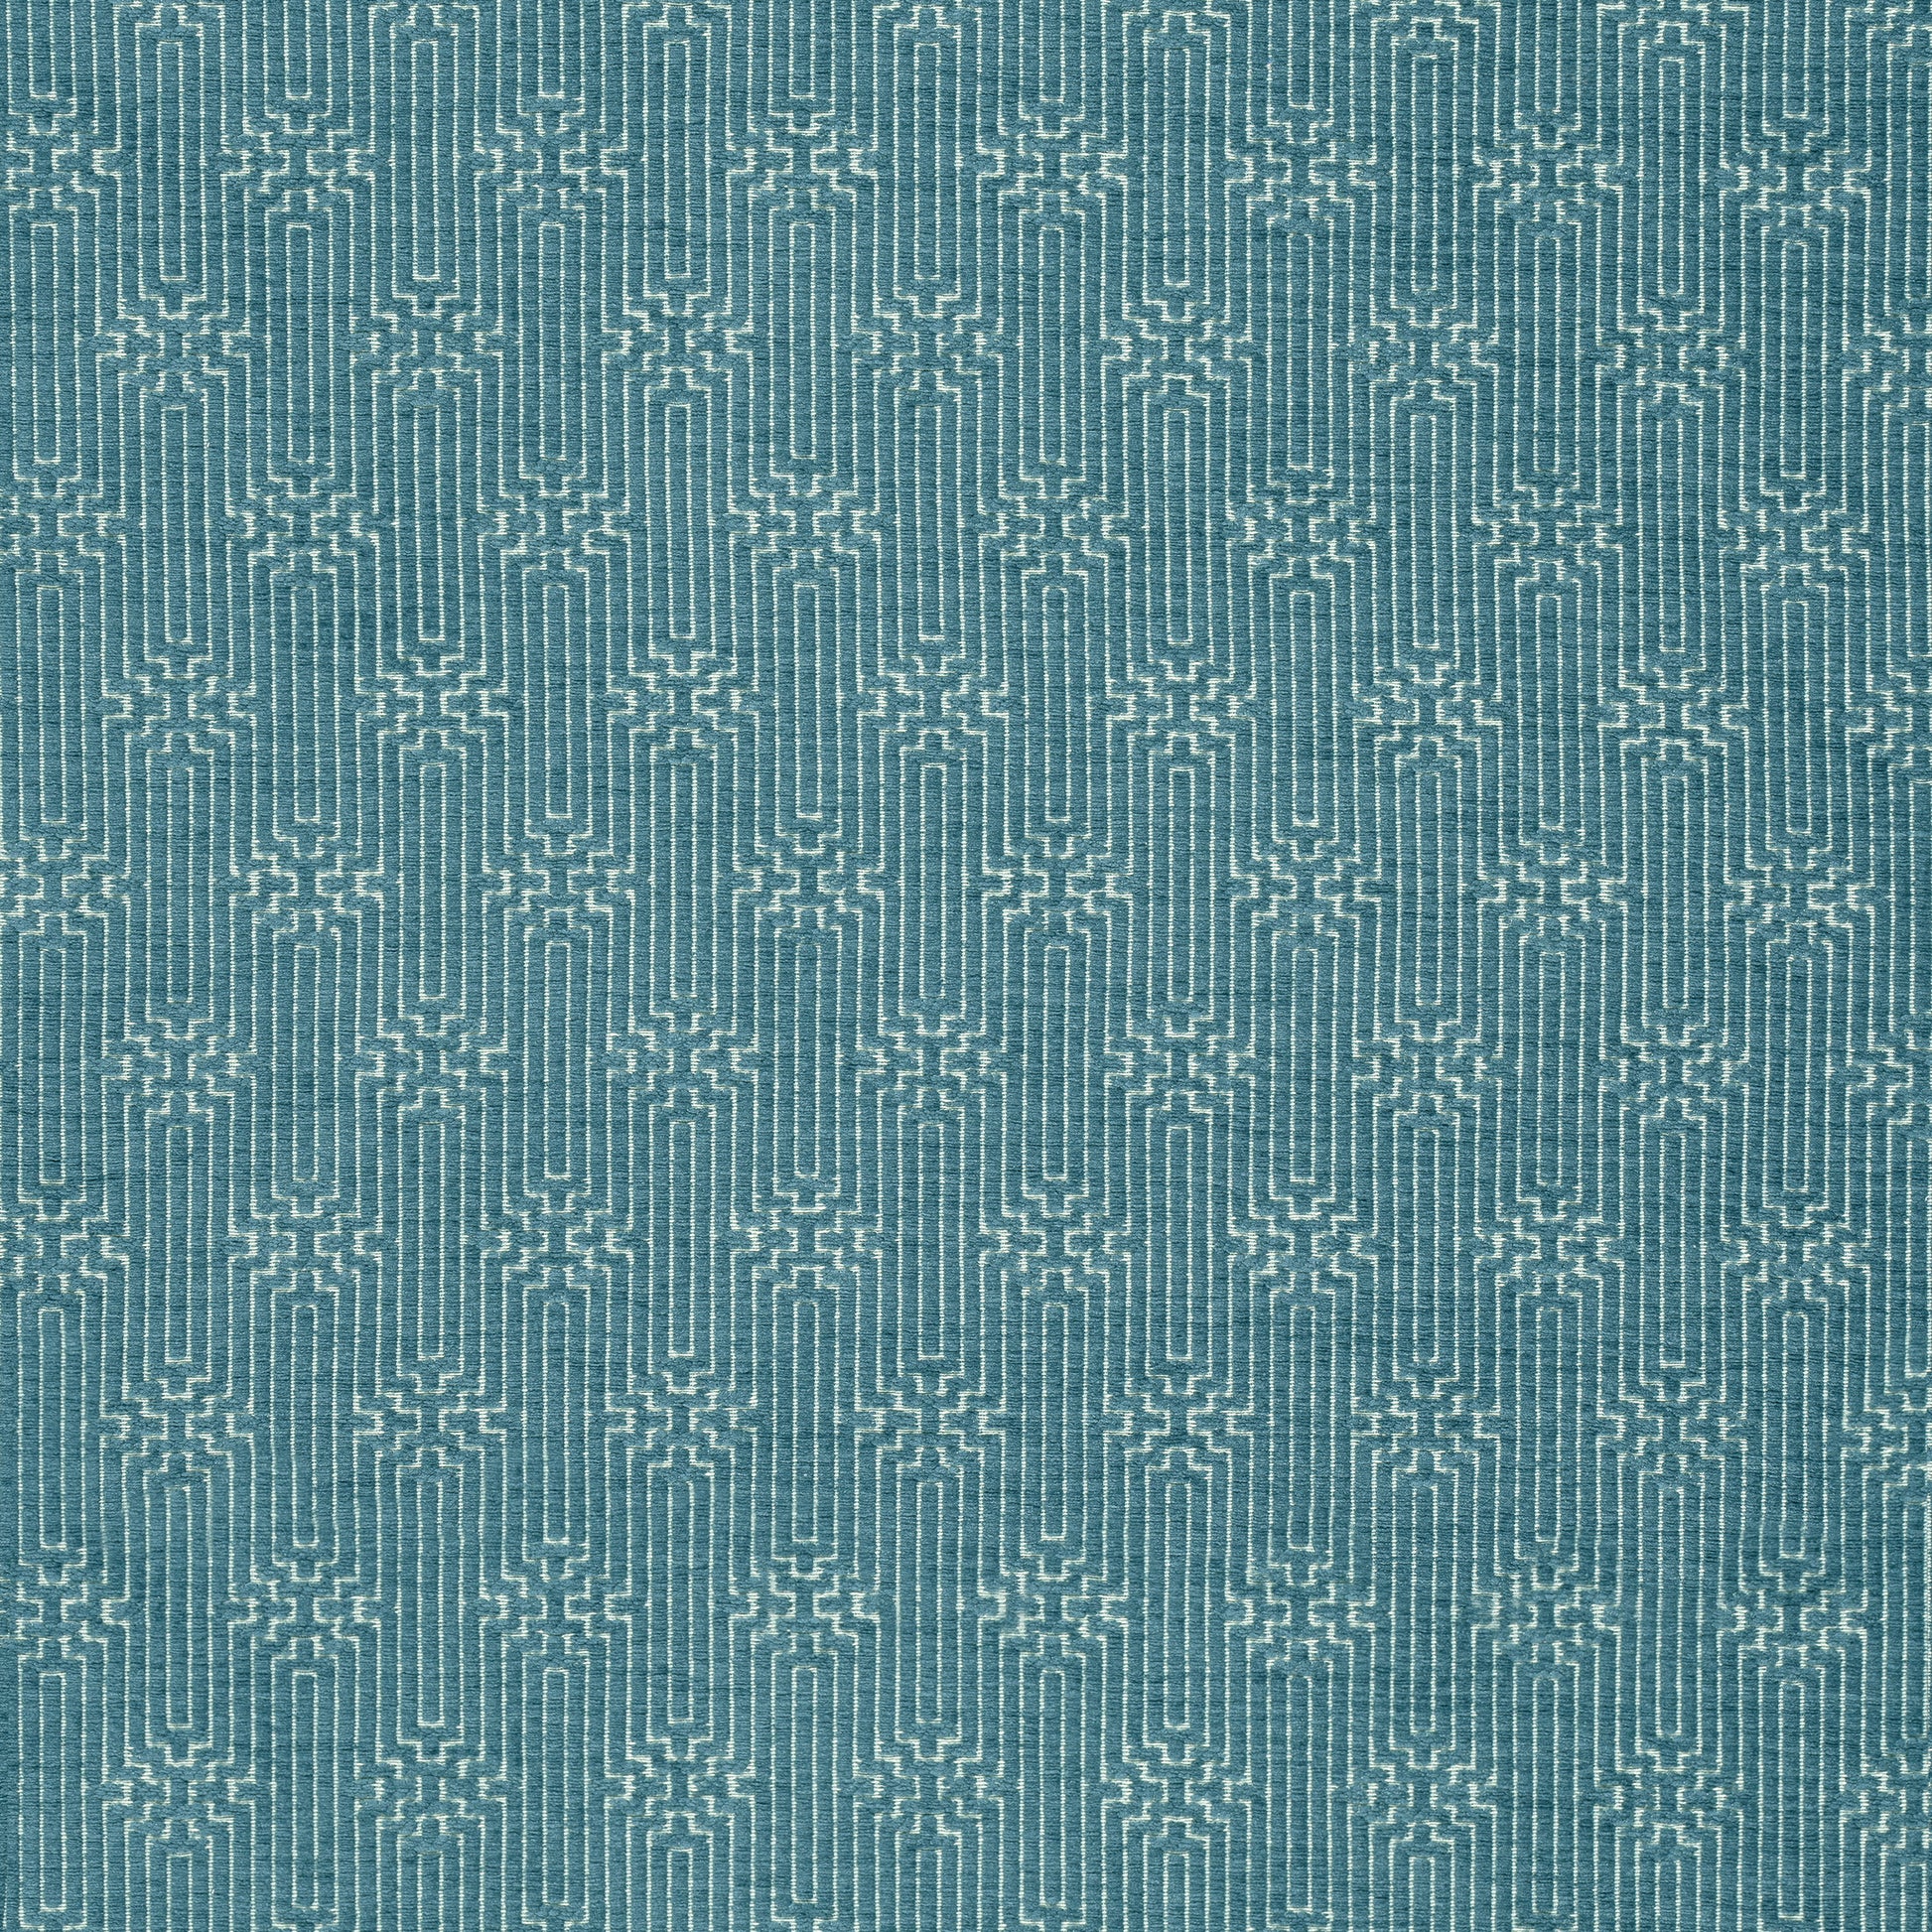 Purchase Thibaut Fabric Product W74212 pattern name Crete color Peacock